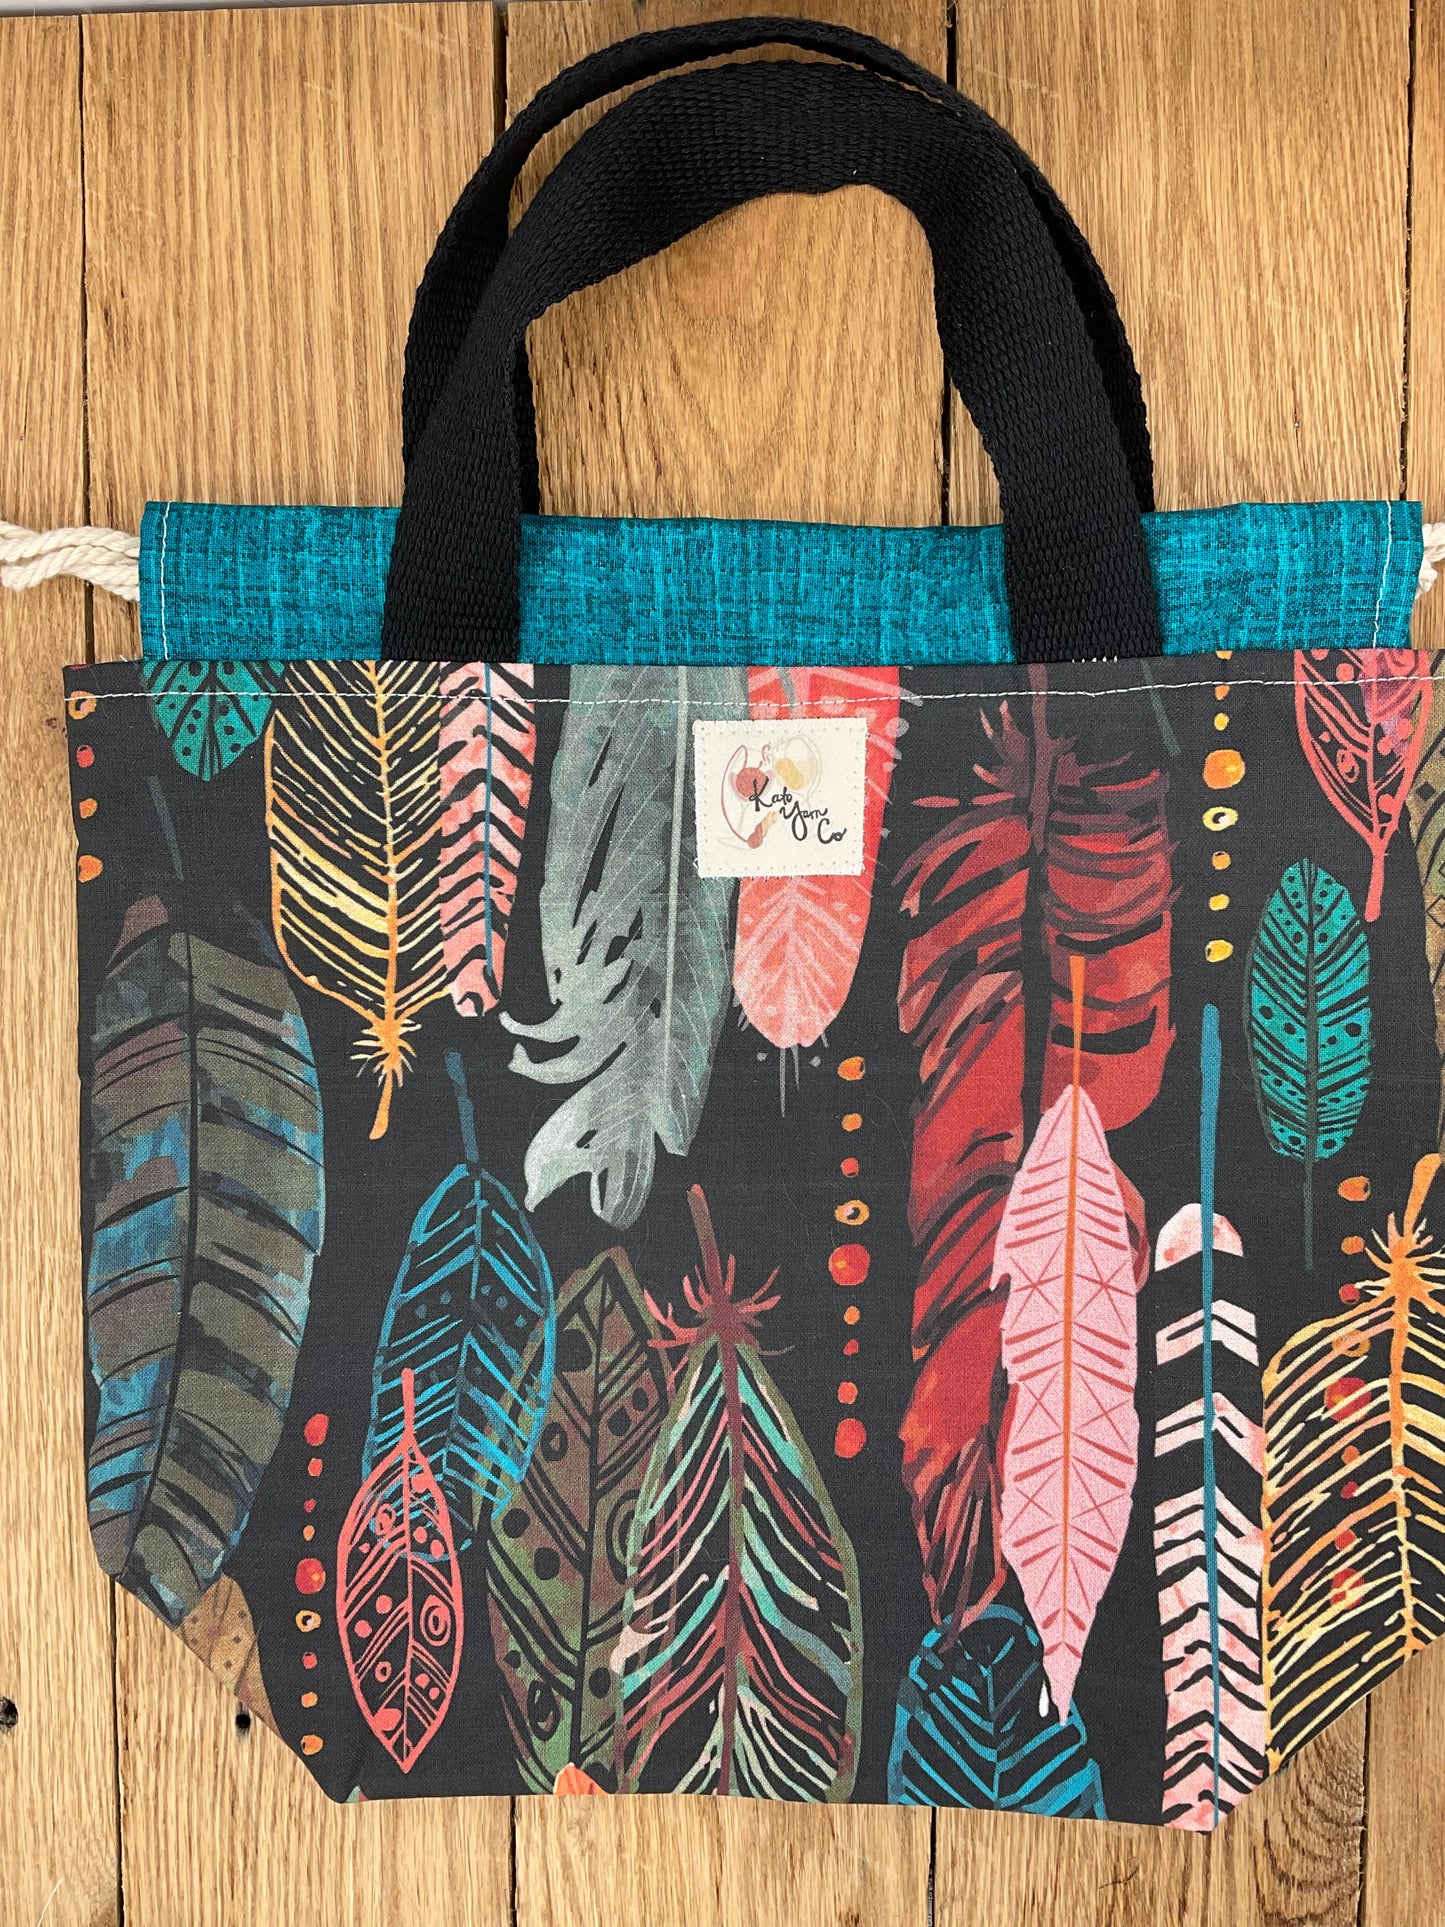 Feathers - Project Bag